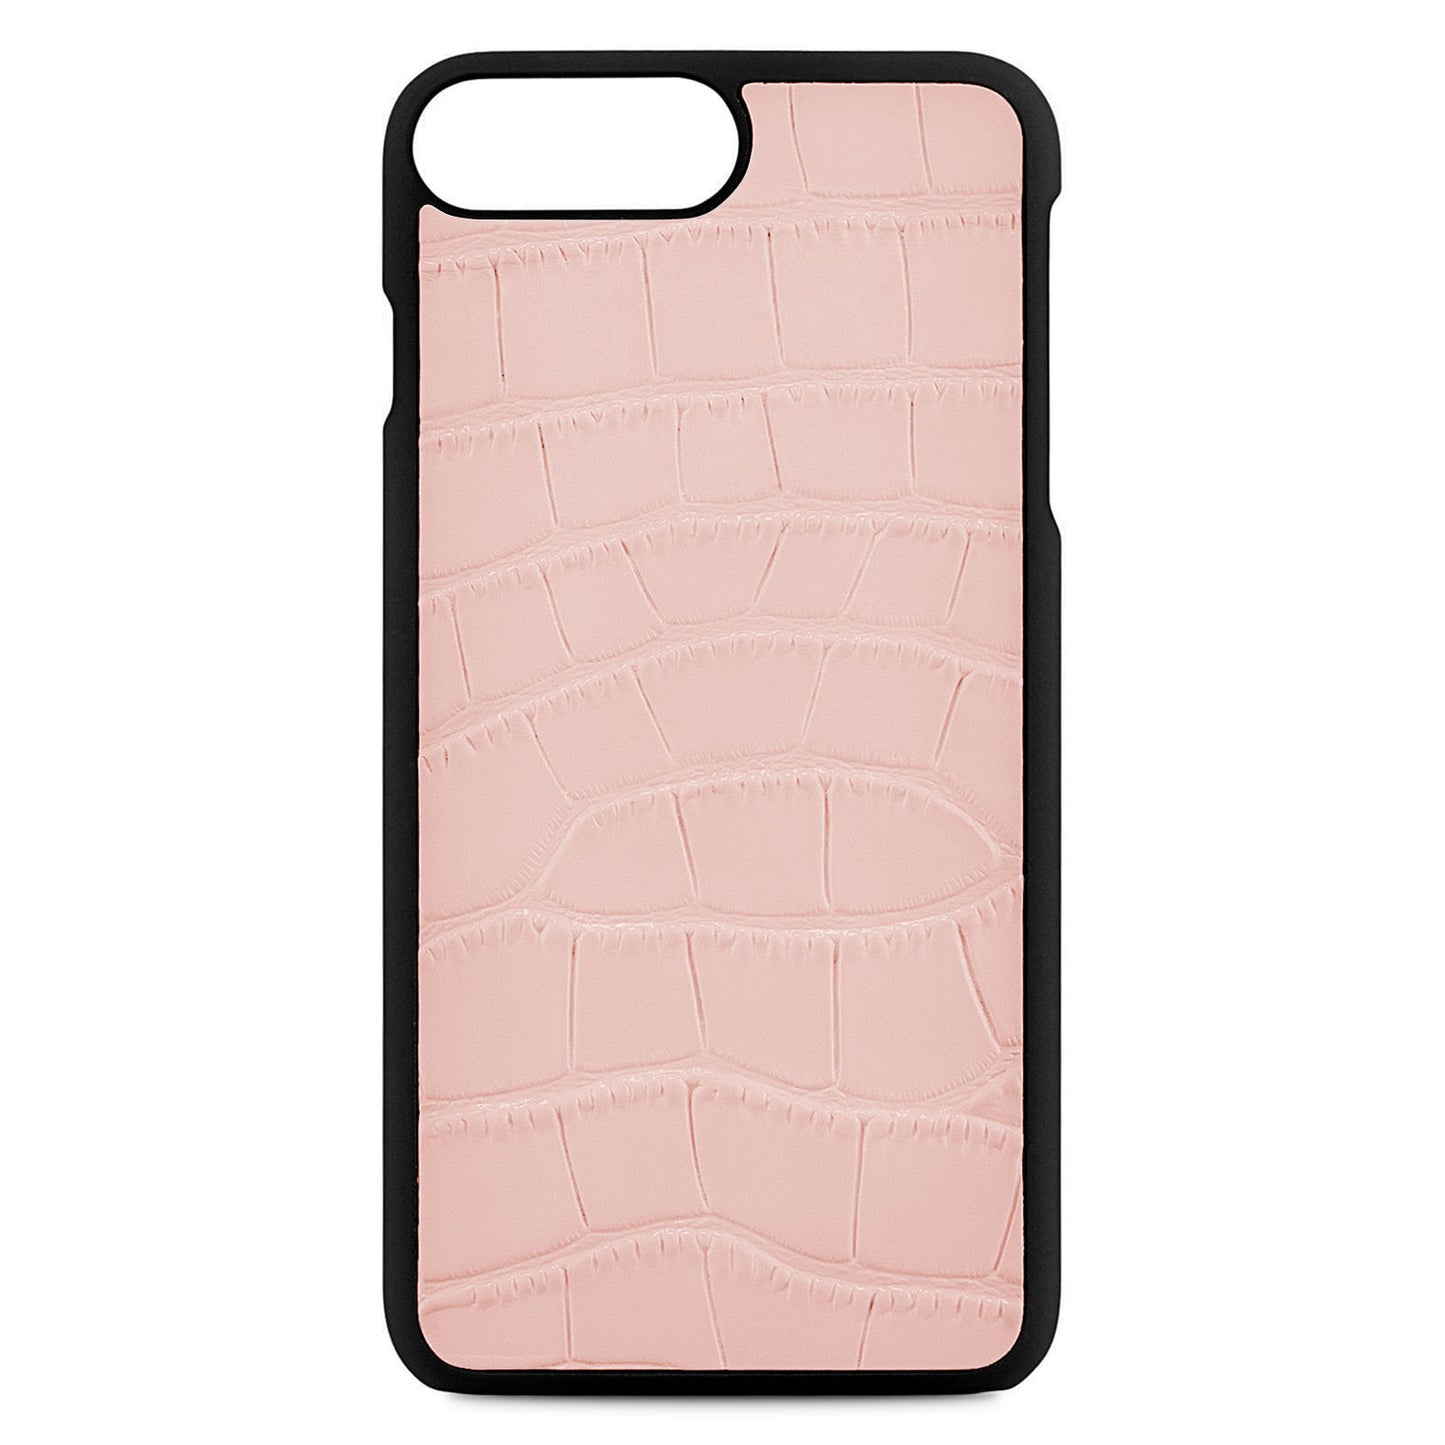 Blank Personalised Pink Croc Leather iPhone 8 Plus Case